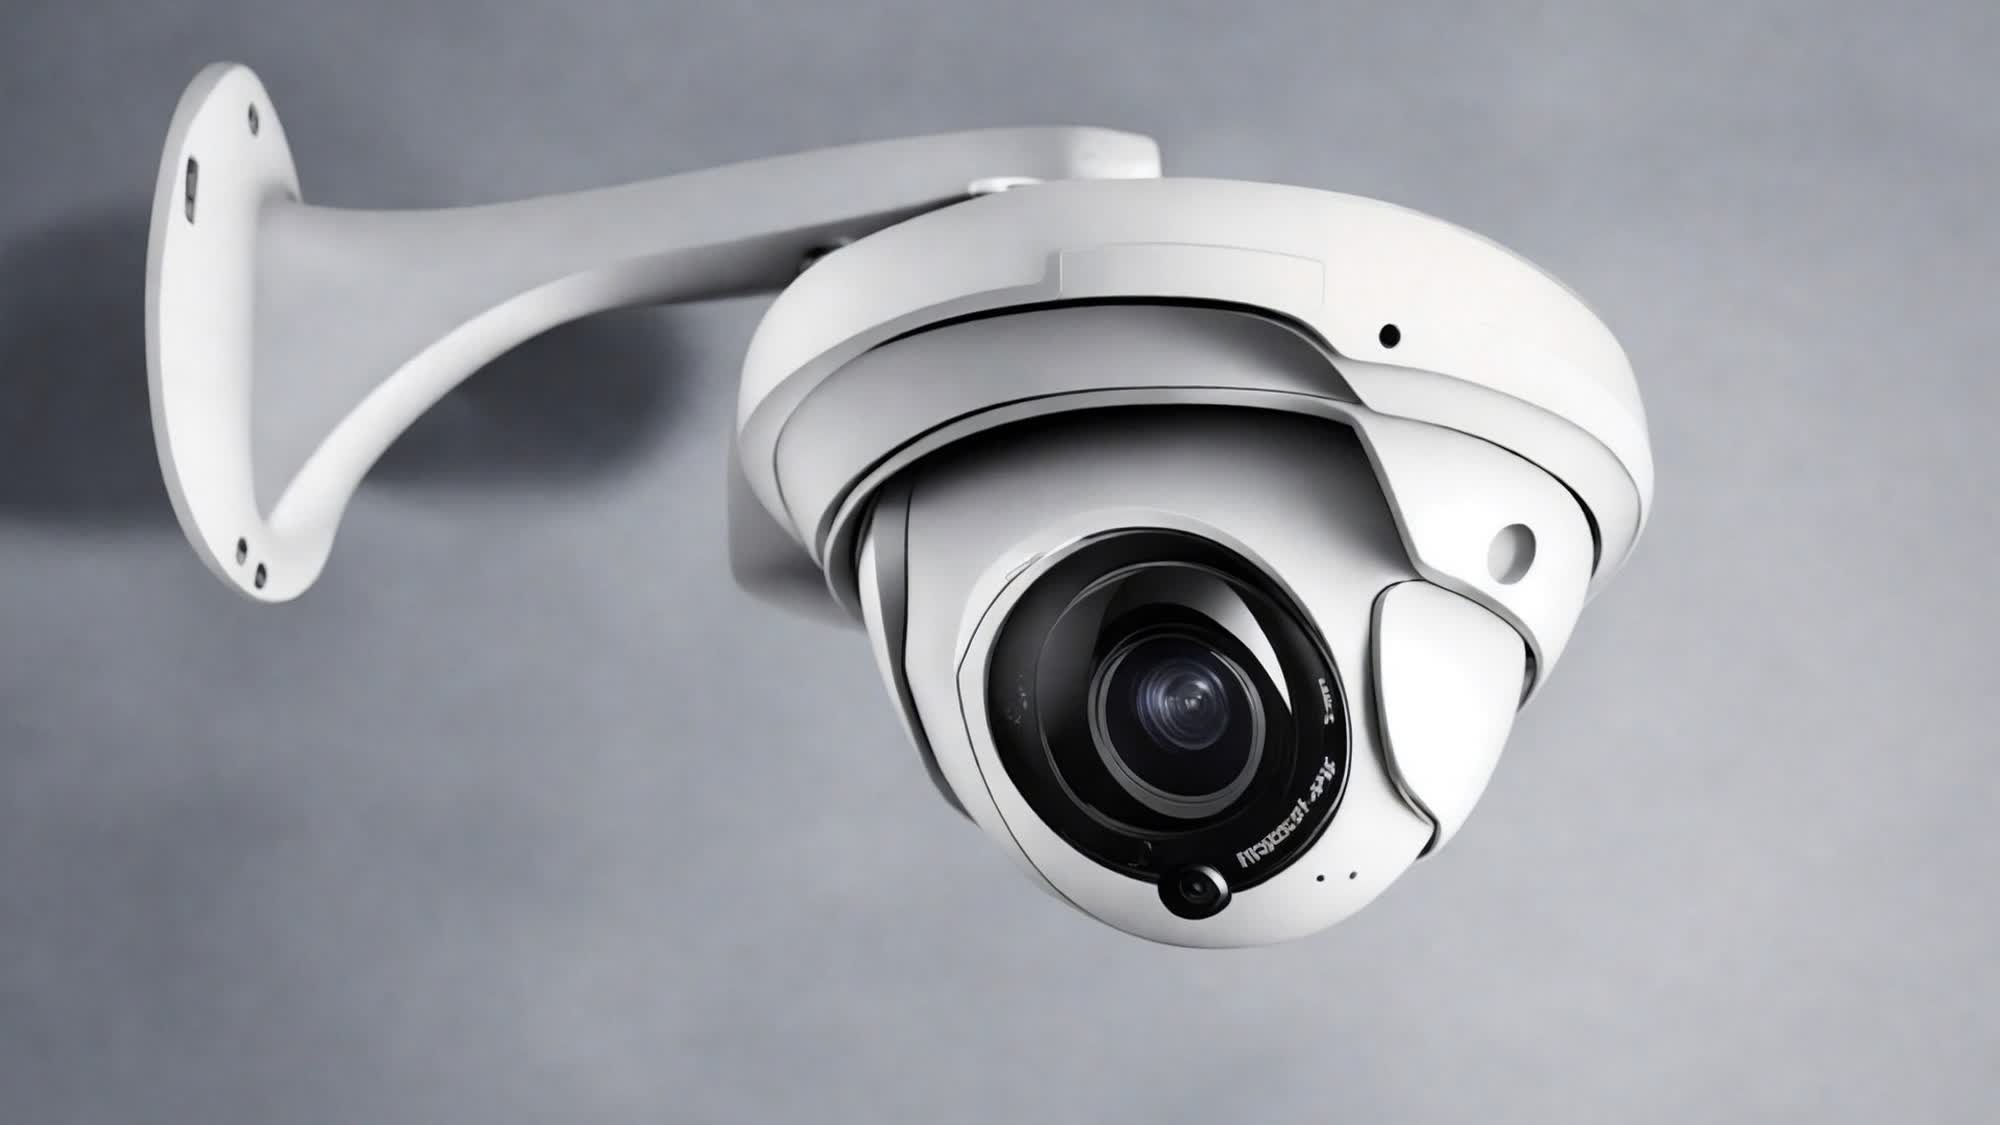 Ubiquiti fixes massive bug that allowed users to view others' security cameras